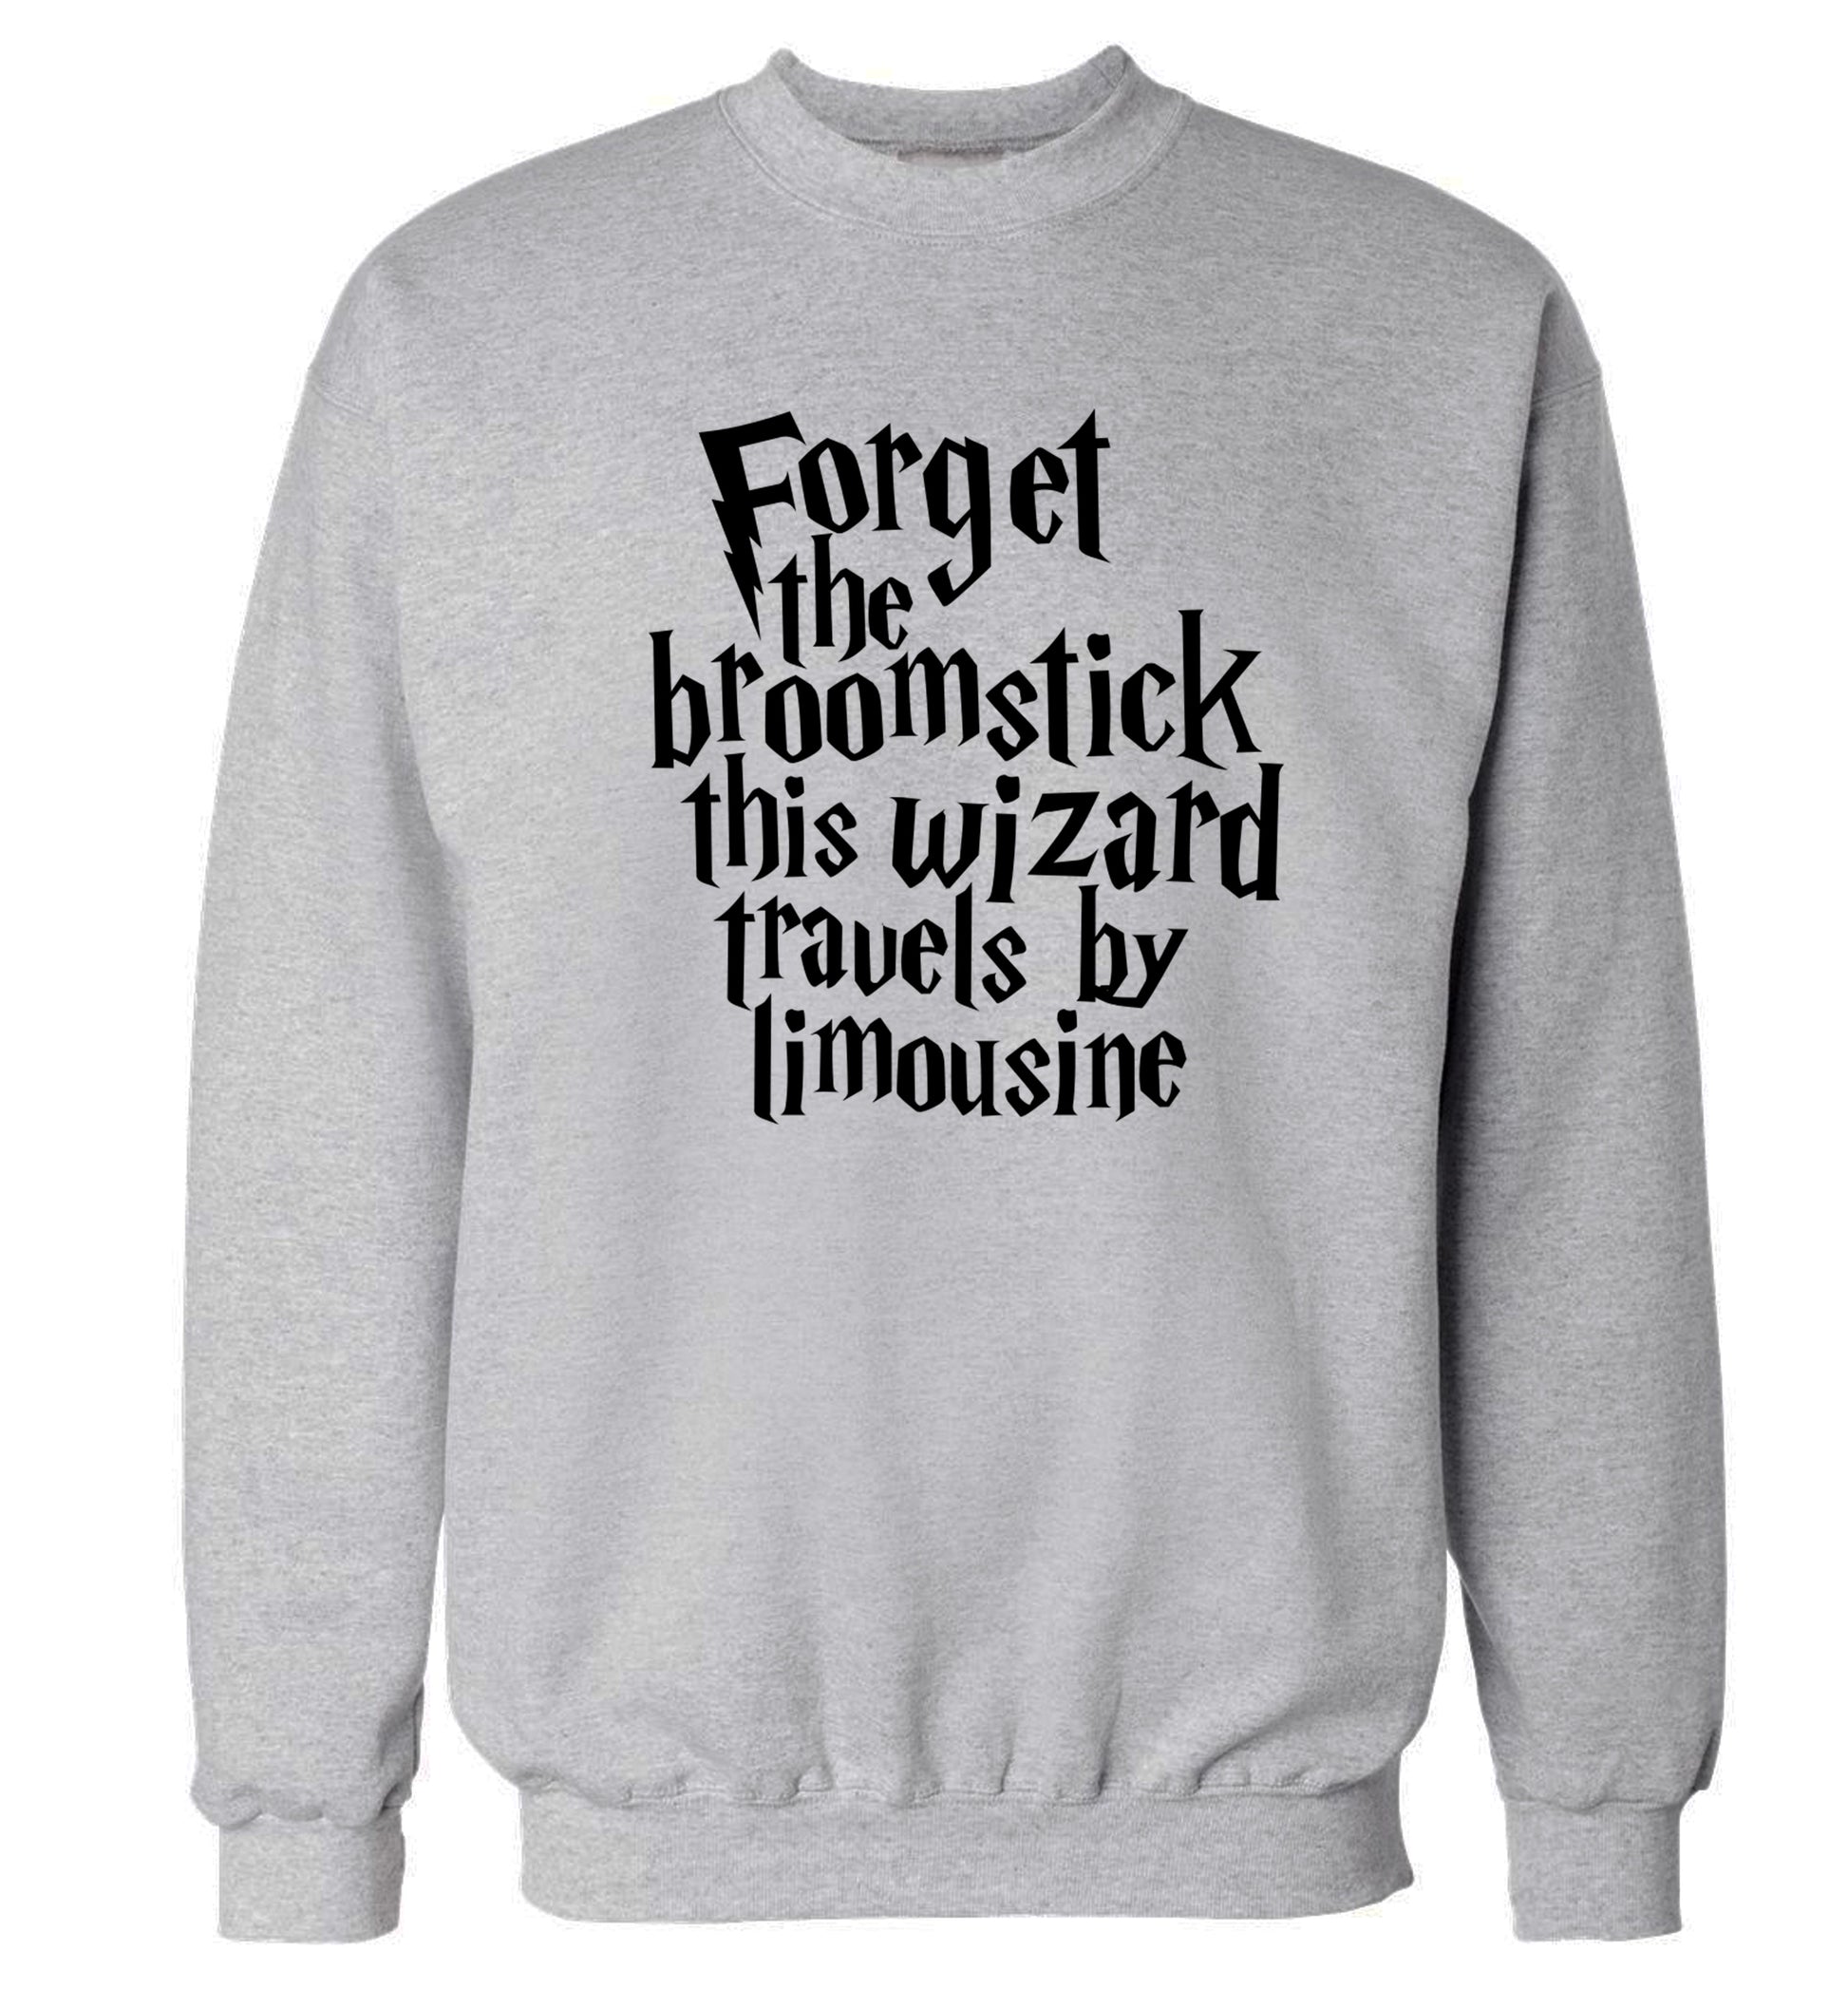 Forget the broomstick this wizard travels by limousine Adult's unisexgrey Sweater 2XL